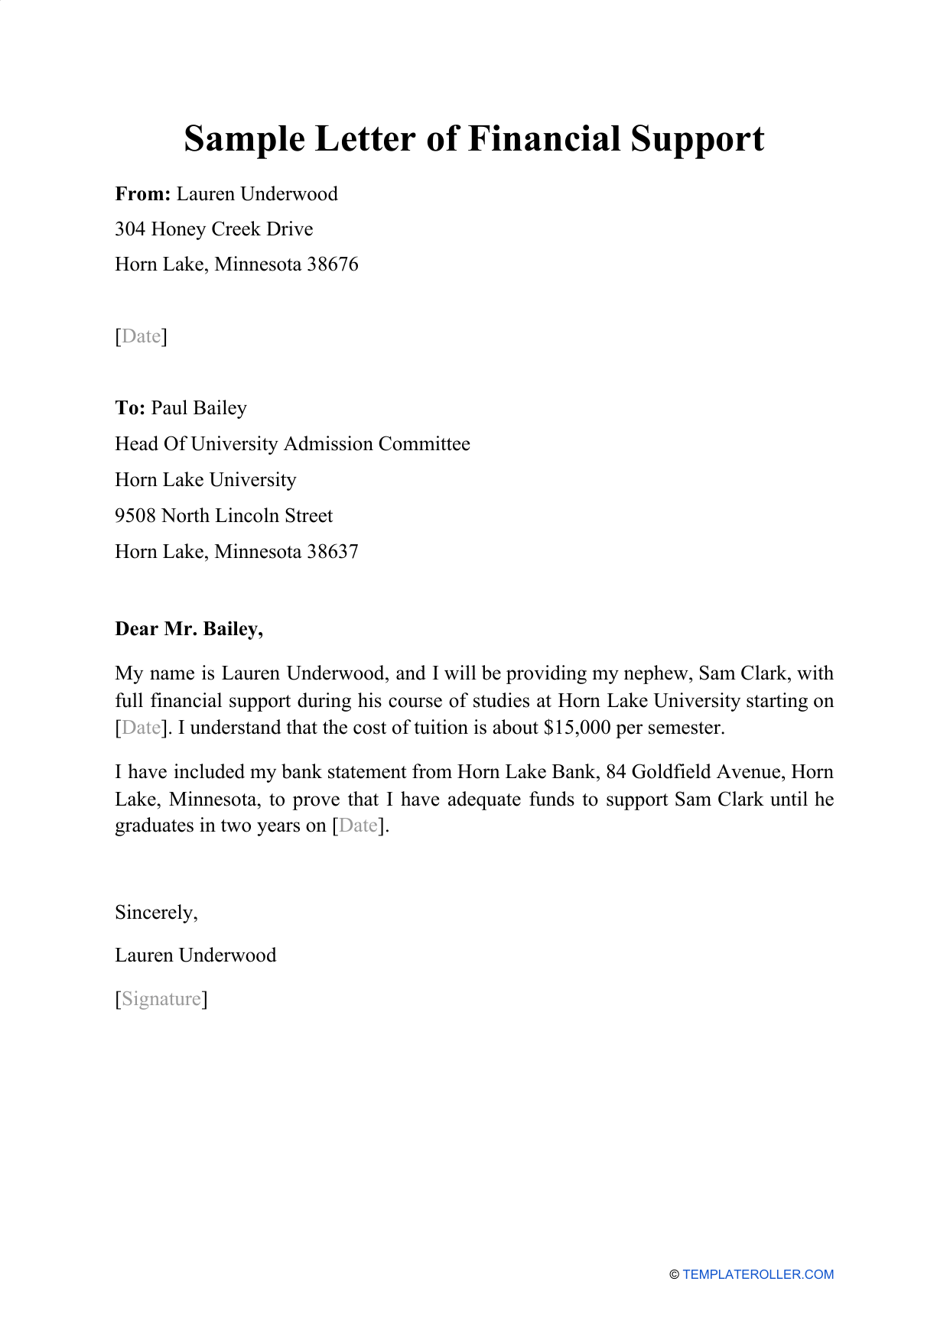 sample cover letter for financial assistance